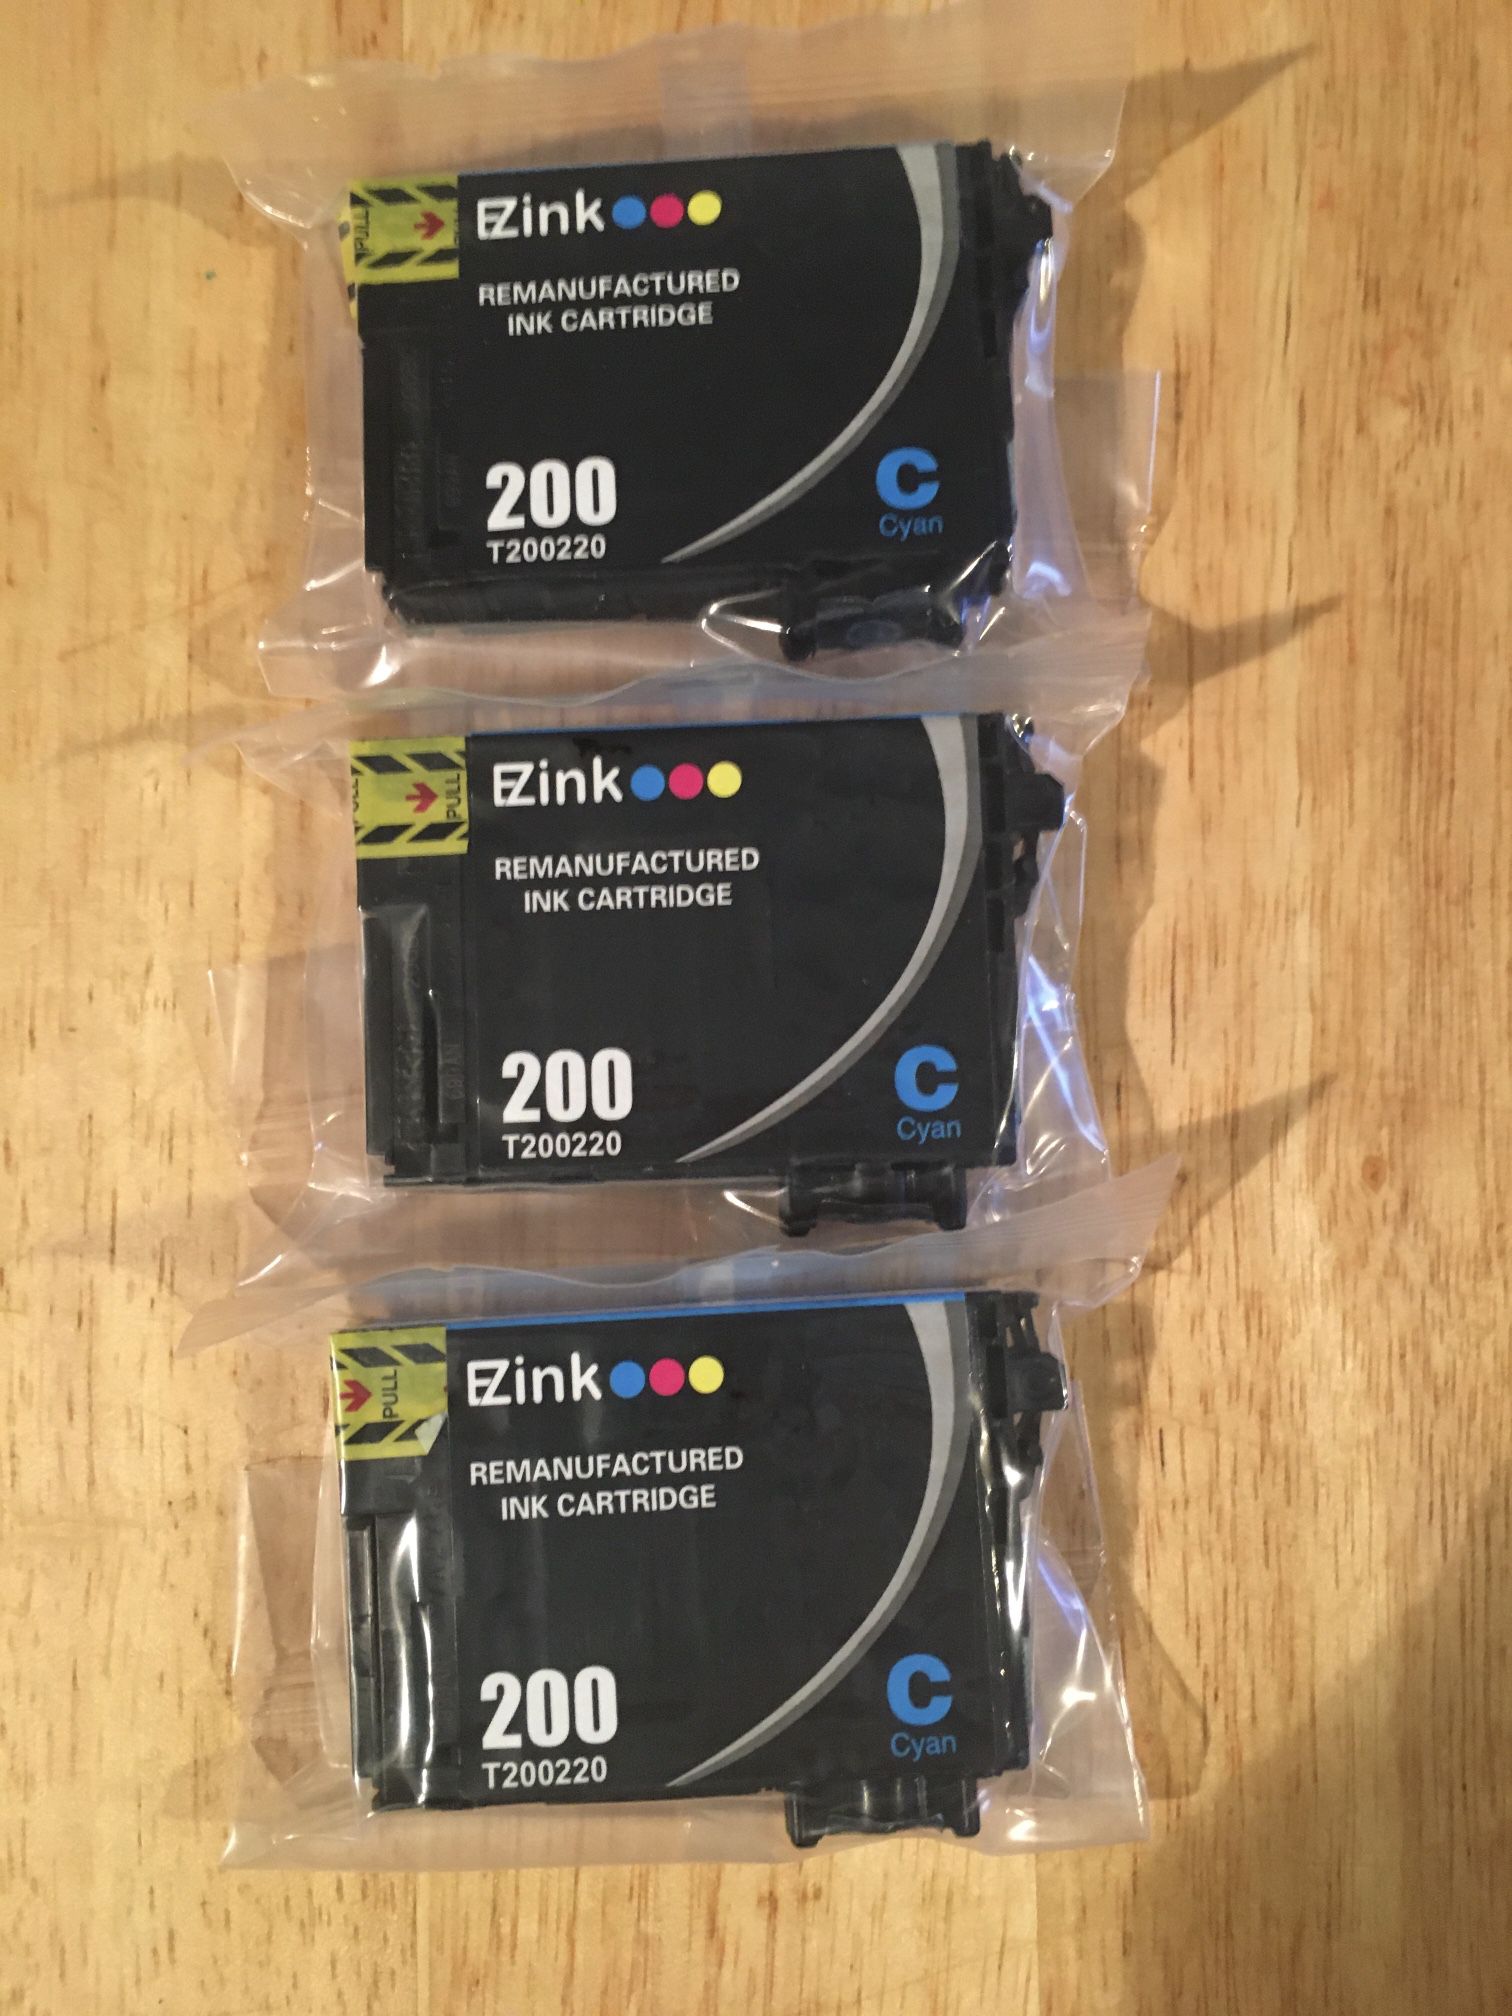 E-Z Ink (TM) Remanufactured Ink Cartridge Replacement for Epson Printer  